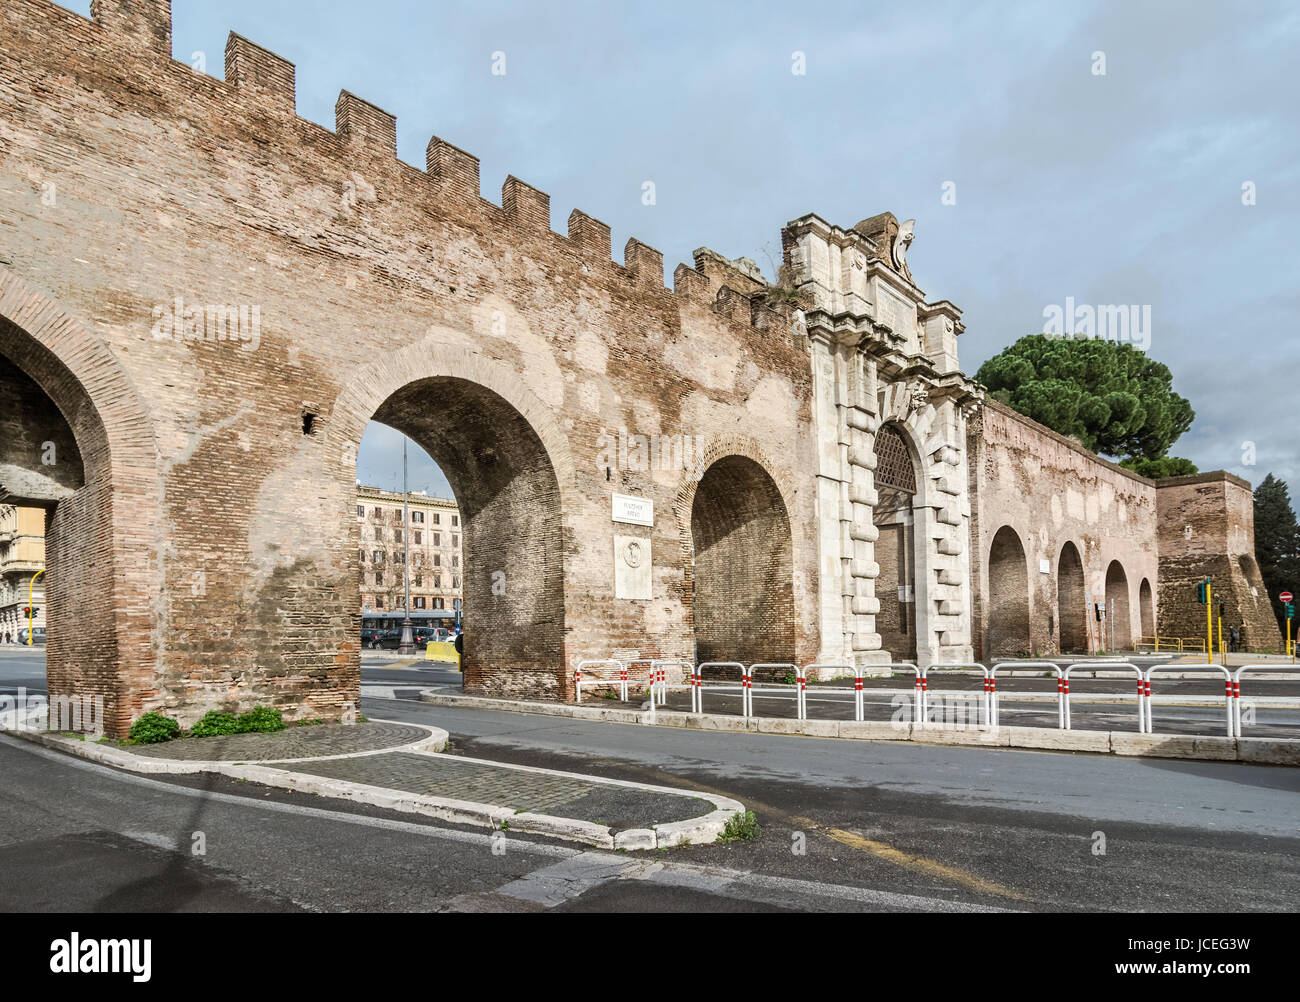 Porta San Giovanni is a gate in the Aurelian Wall of Rome, spanning piazzale Appio; a 'modern' door that pope Gregory XIII had built in 1574 by Michelangelo's apprentices, Jacopo (Giacomo) Del Duca. Stock Photo